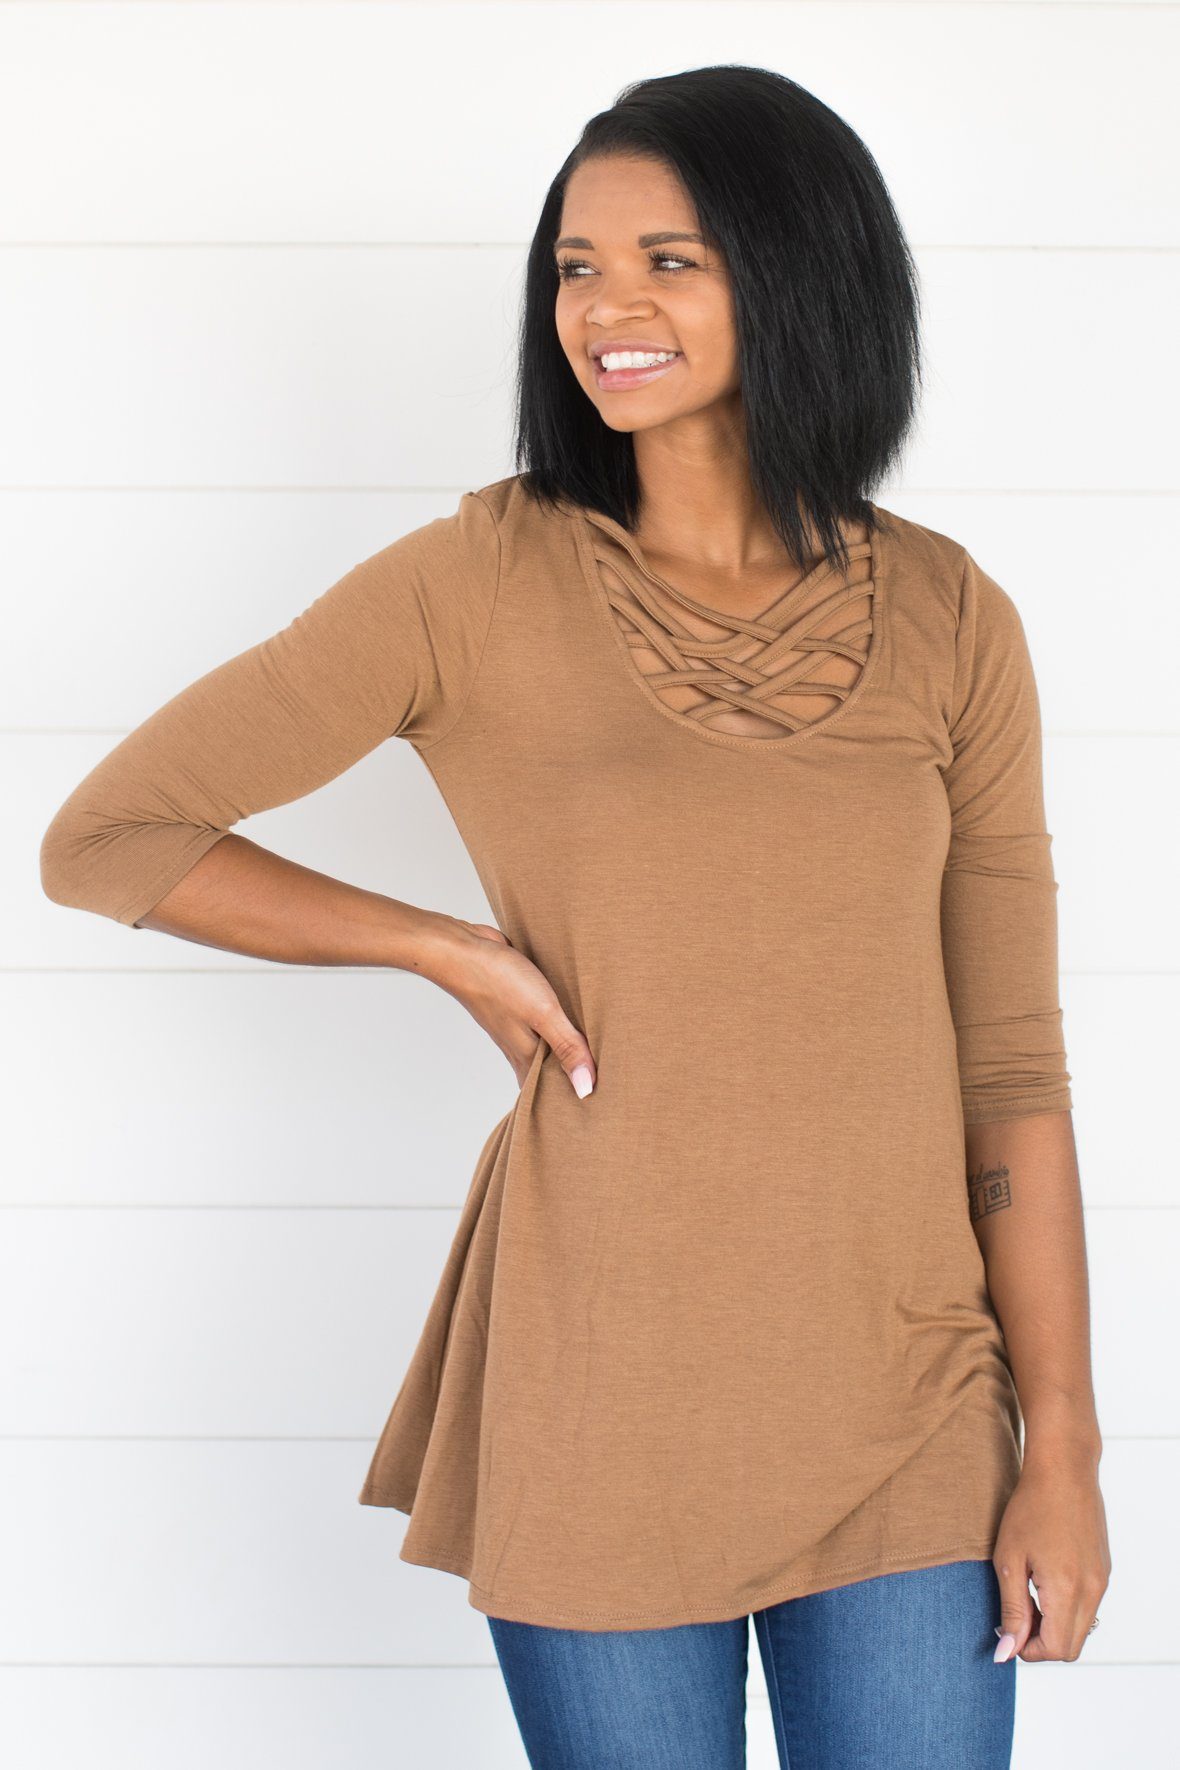 Always Love You Criss Cross V-Neck 3/4 Sleeve Top in Coco - Filly Flair